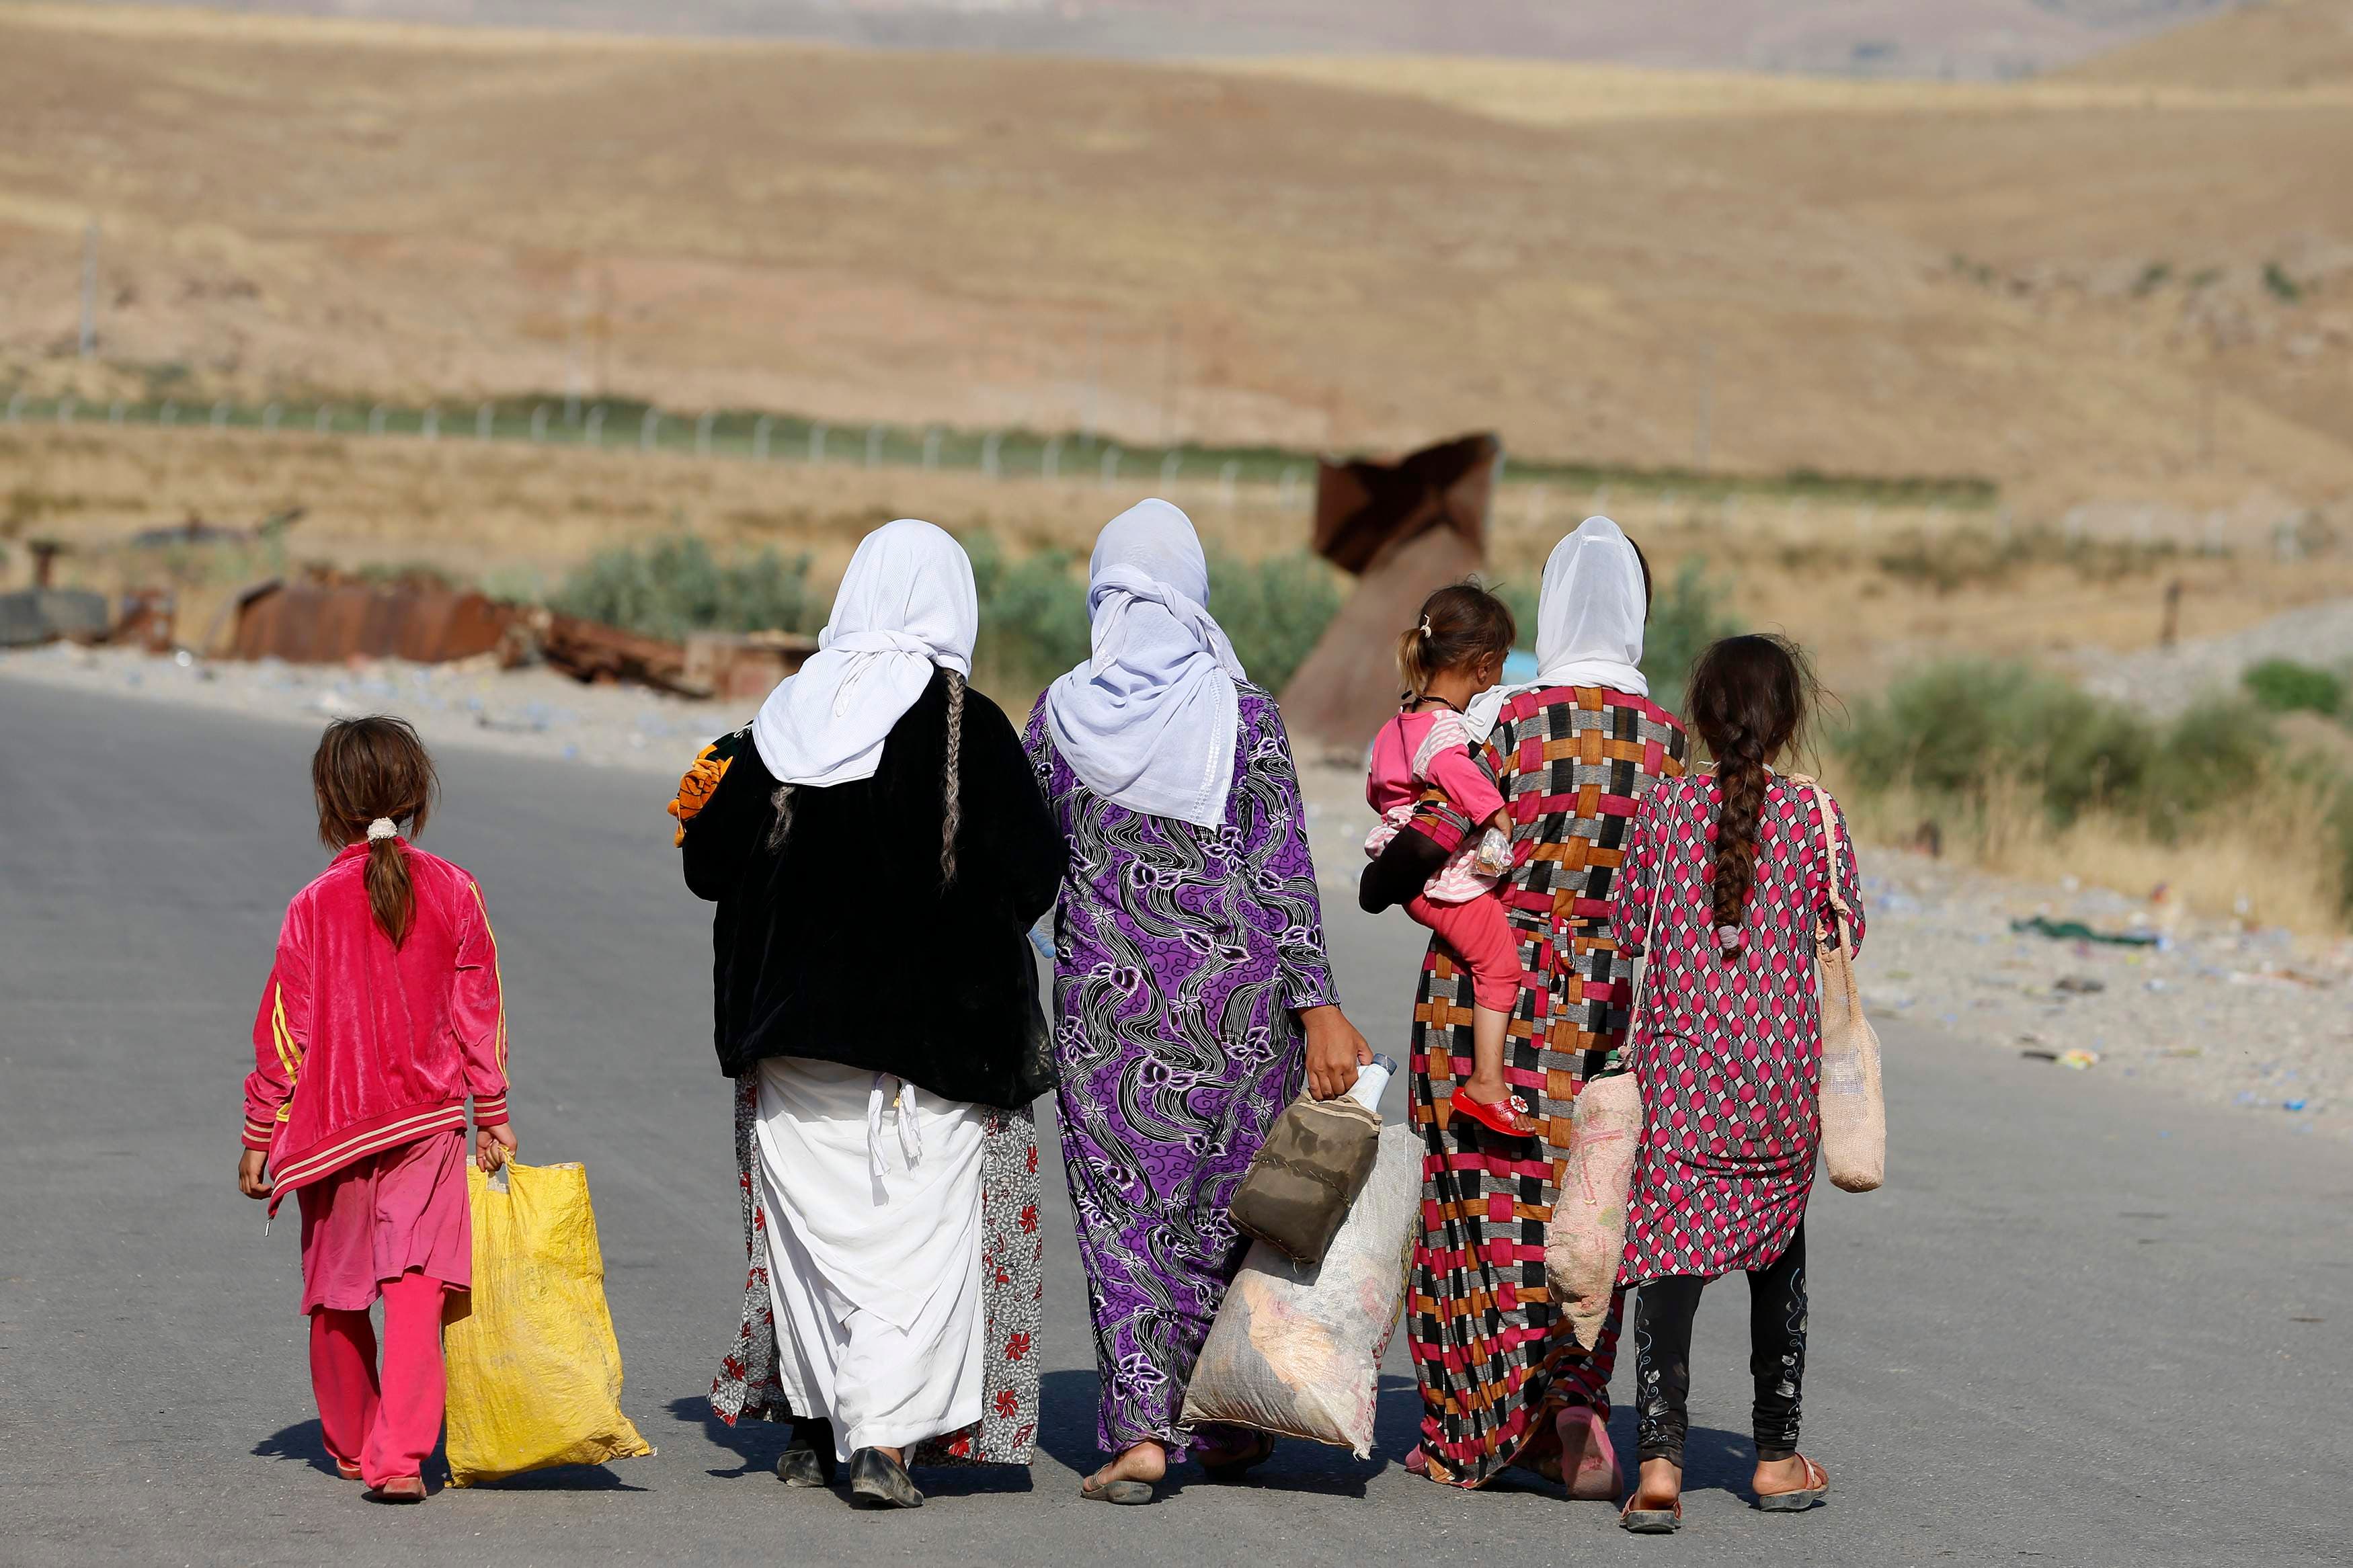 Women and children from the minority Yazidi sect, fleeing the violence in the Iraqi town of Sinjar, walk to a refugee camp after they re-entered Iraq from Syria at the Iraqi-Syrian border crossing in Fishkhabour, Dohuk province, August 14, 2014. reuters